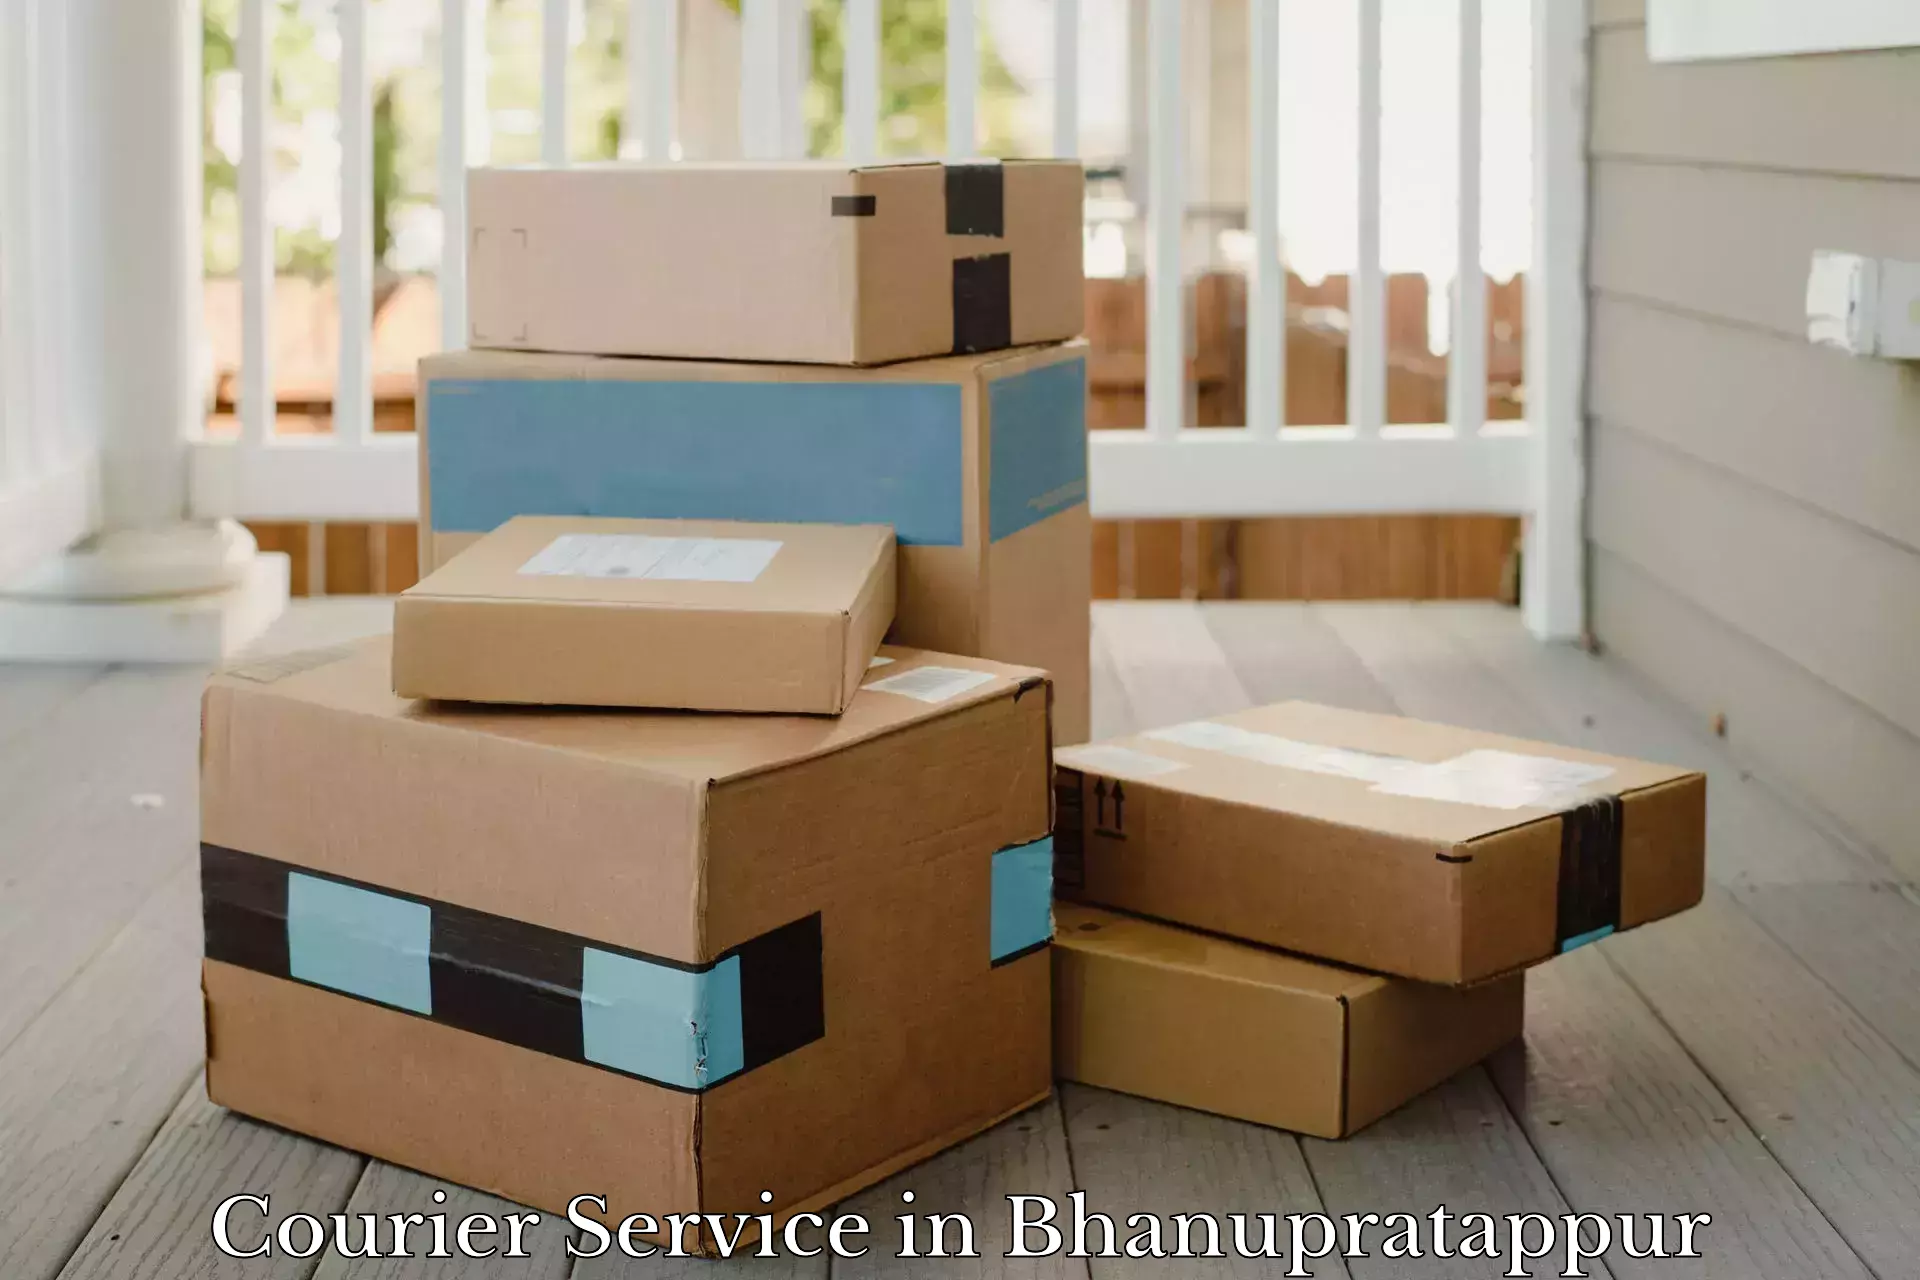 Same-day delivery options in Bhanupratappur